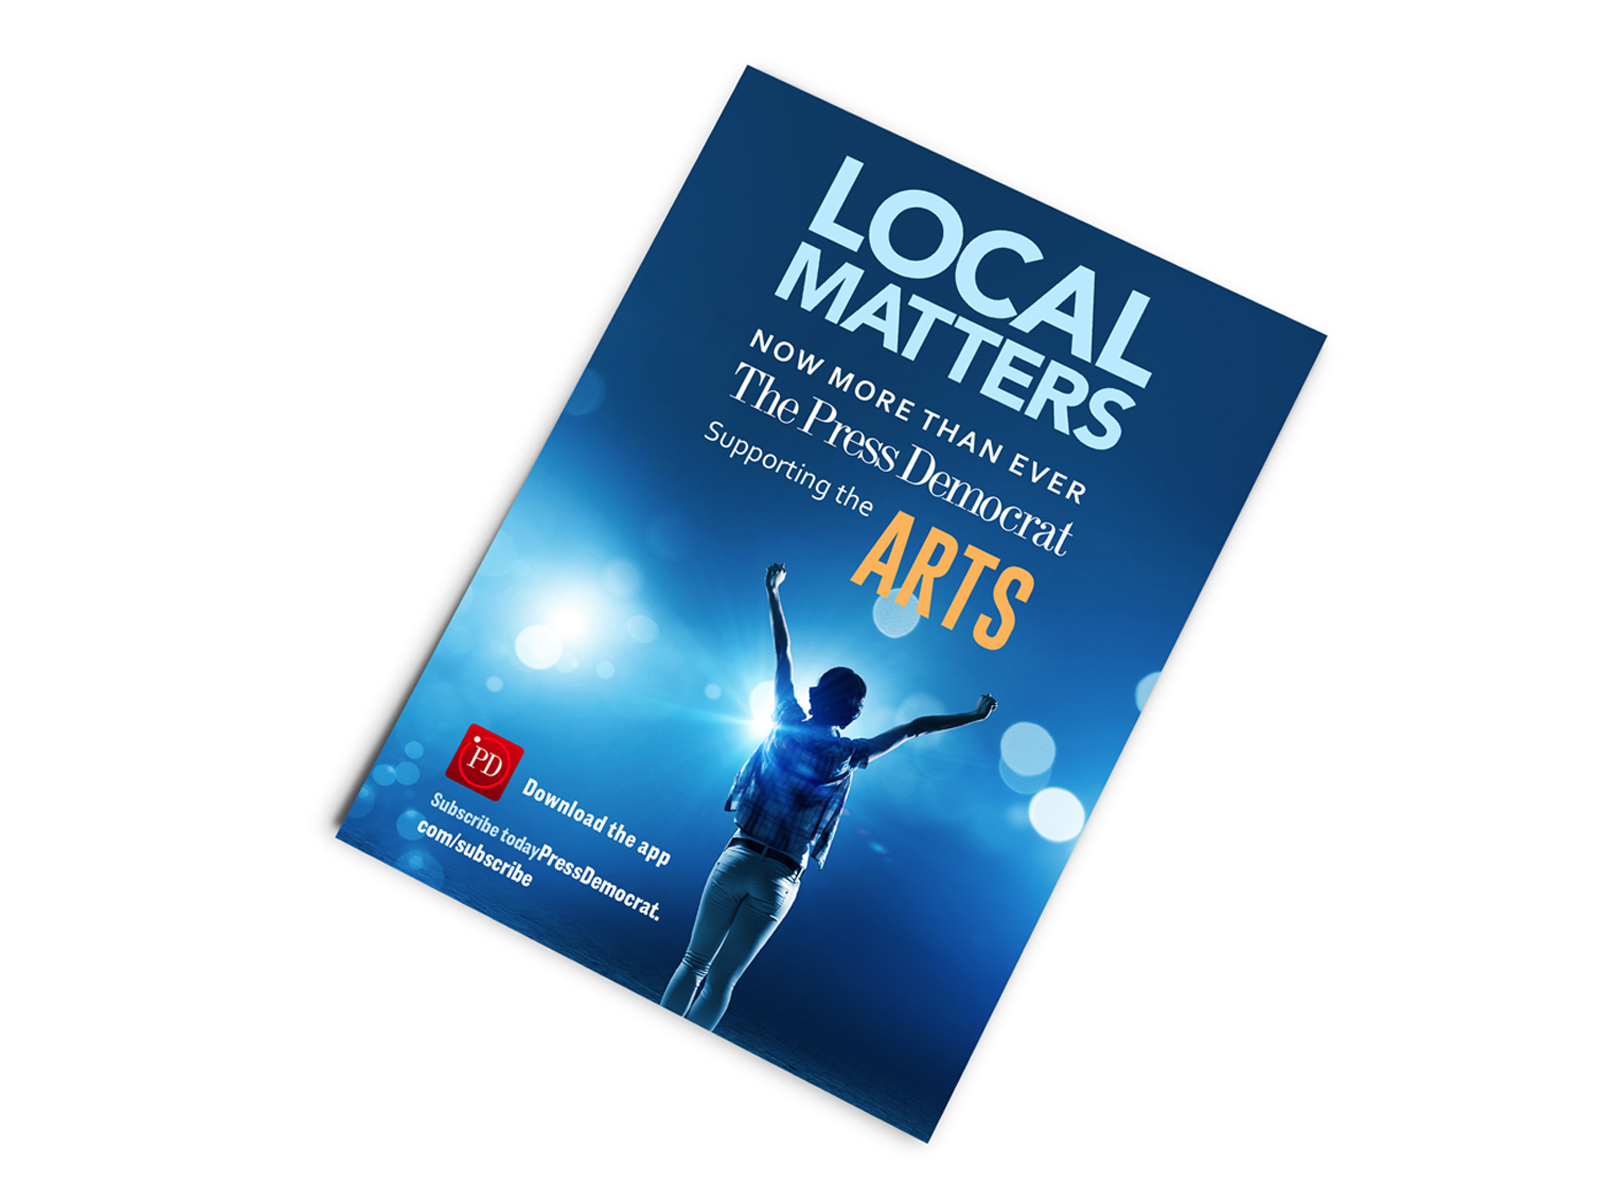 Local Matters campaign full page ad